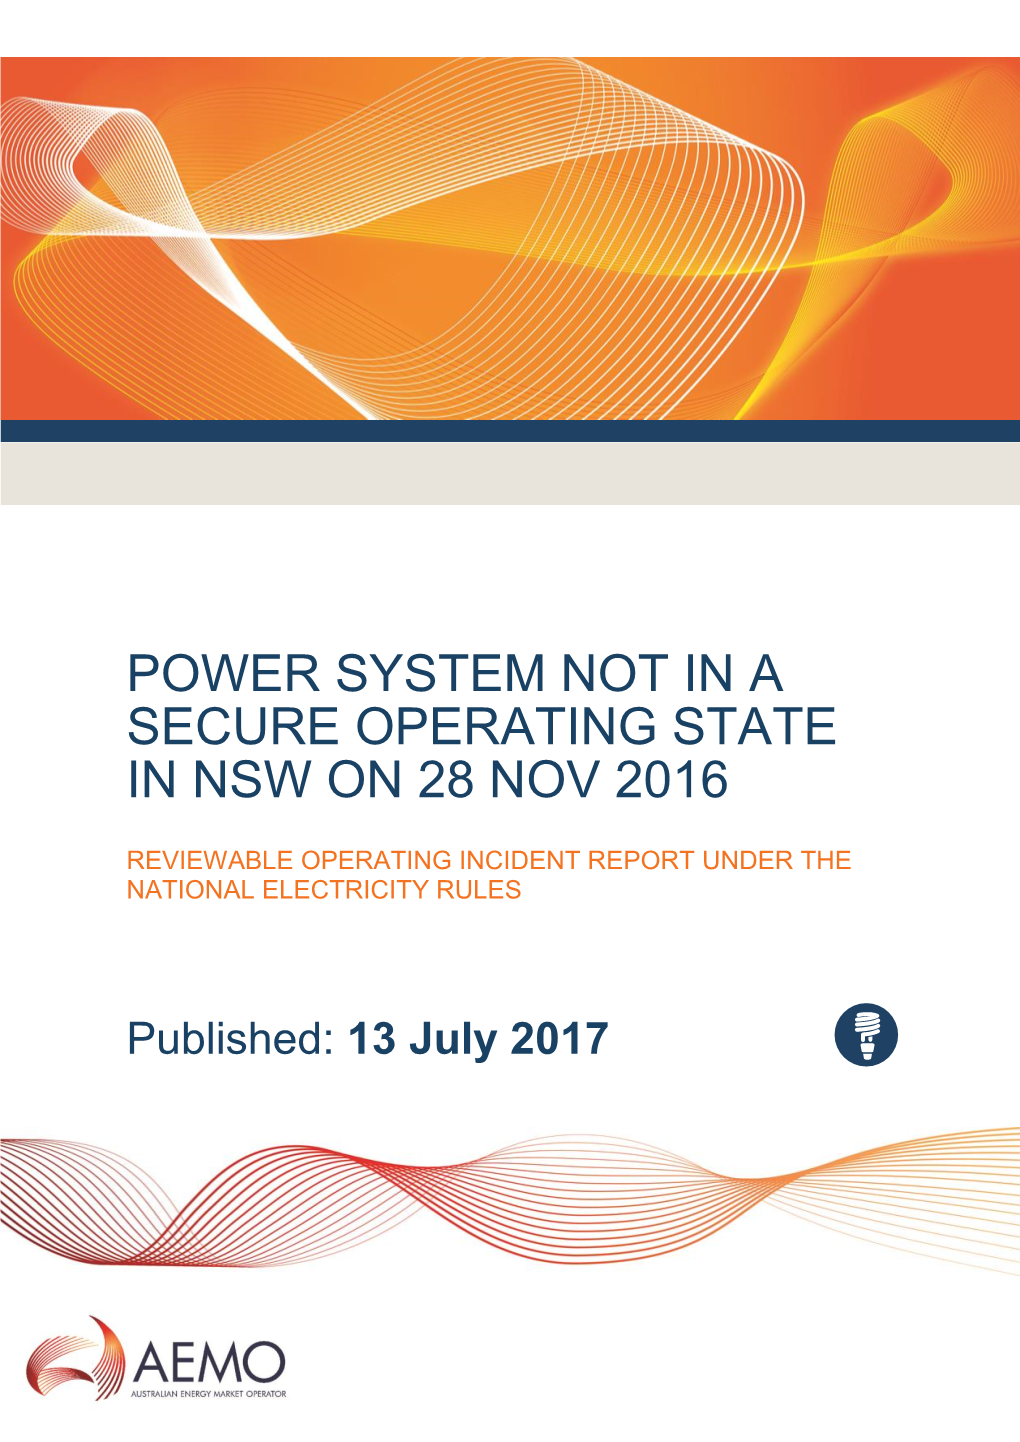 Power System Not in a Secure Operating State in Nsw on 28 Nov 2016